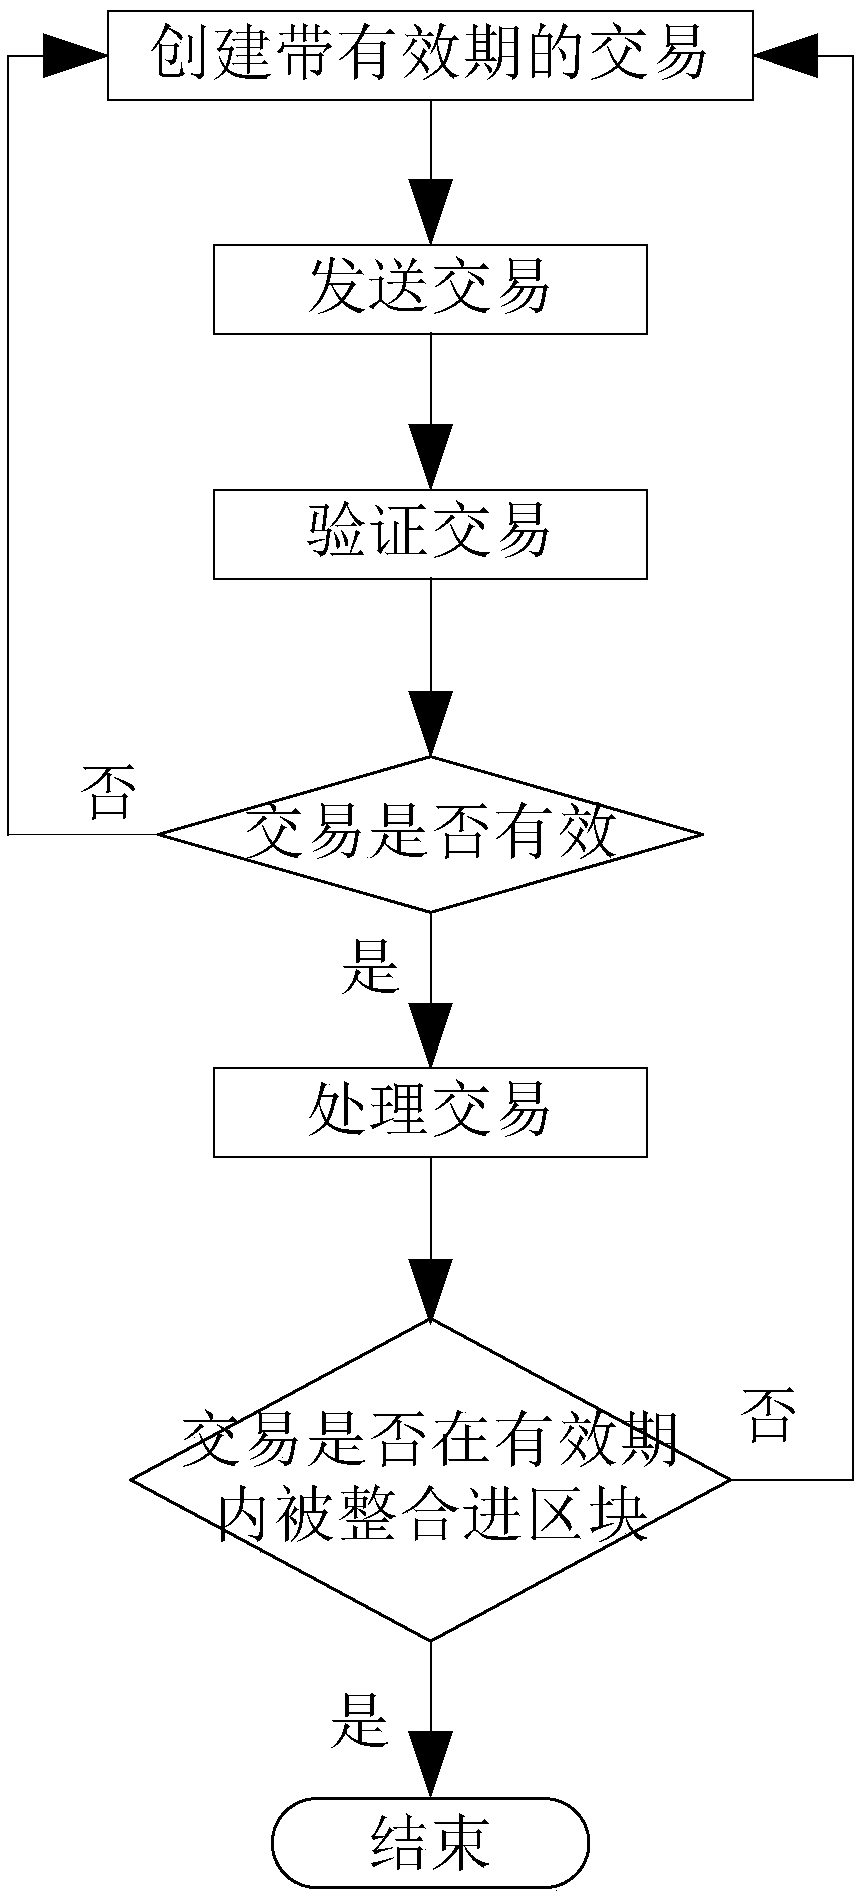 Method and system for preventing repeated payment